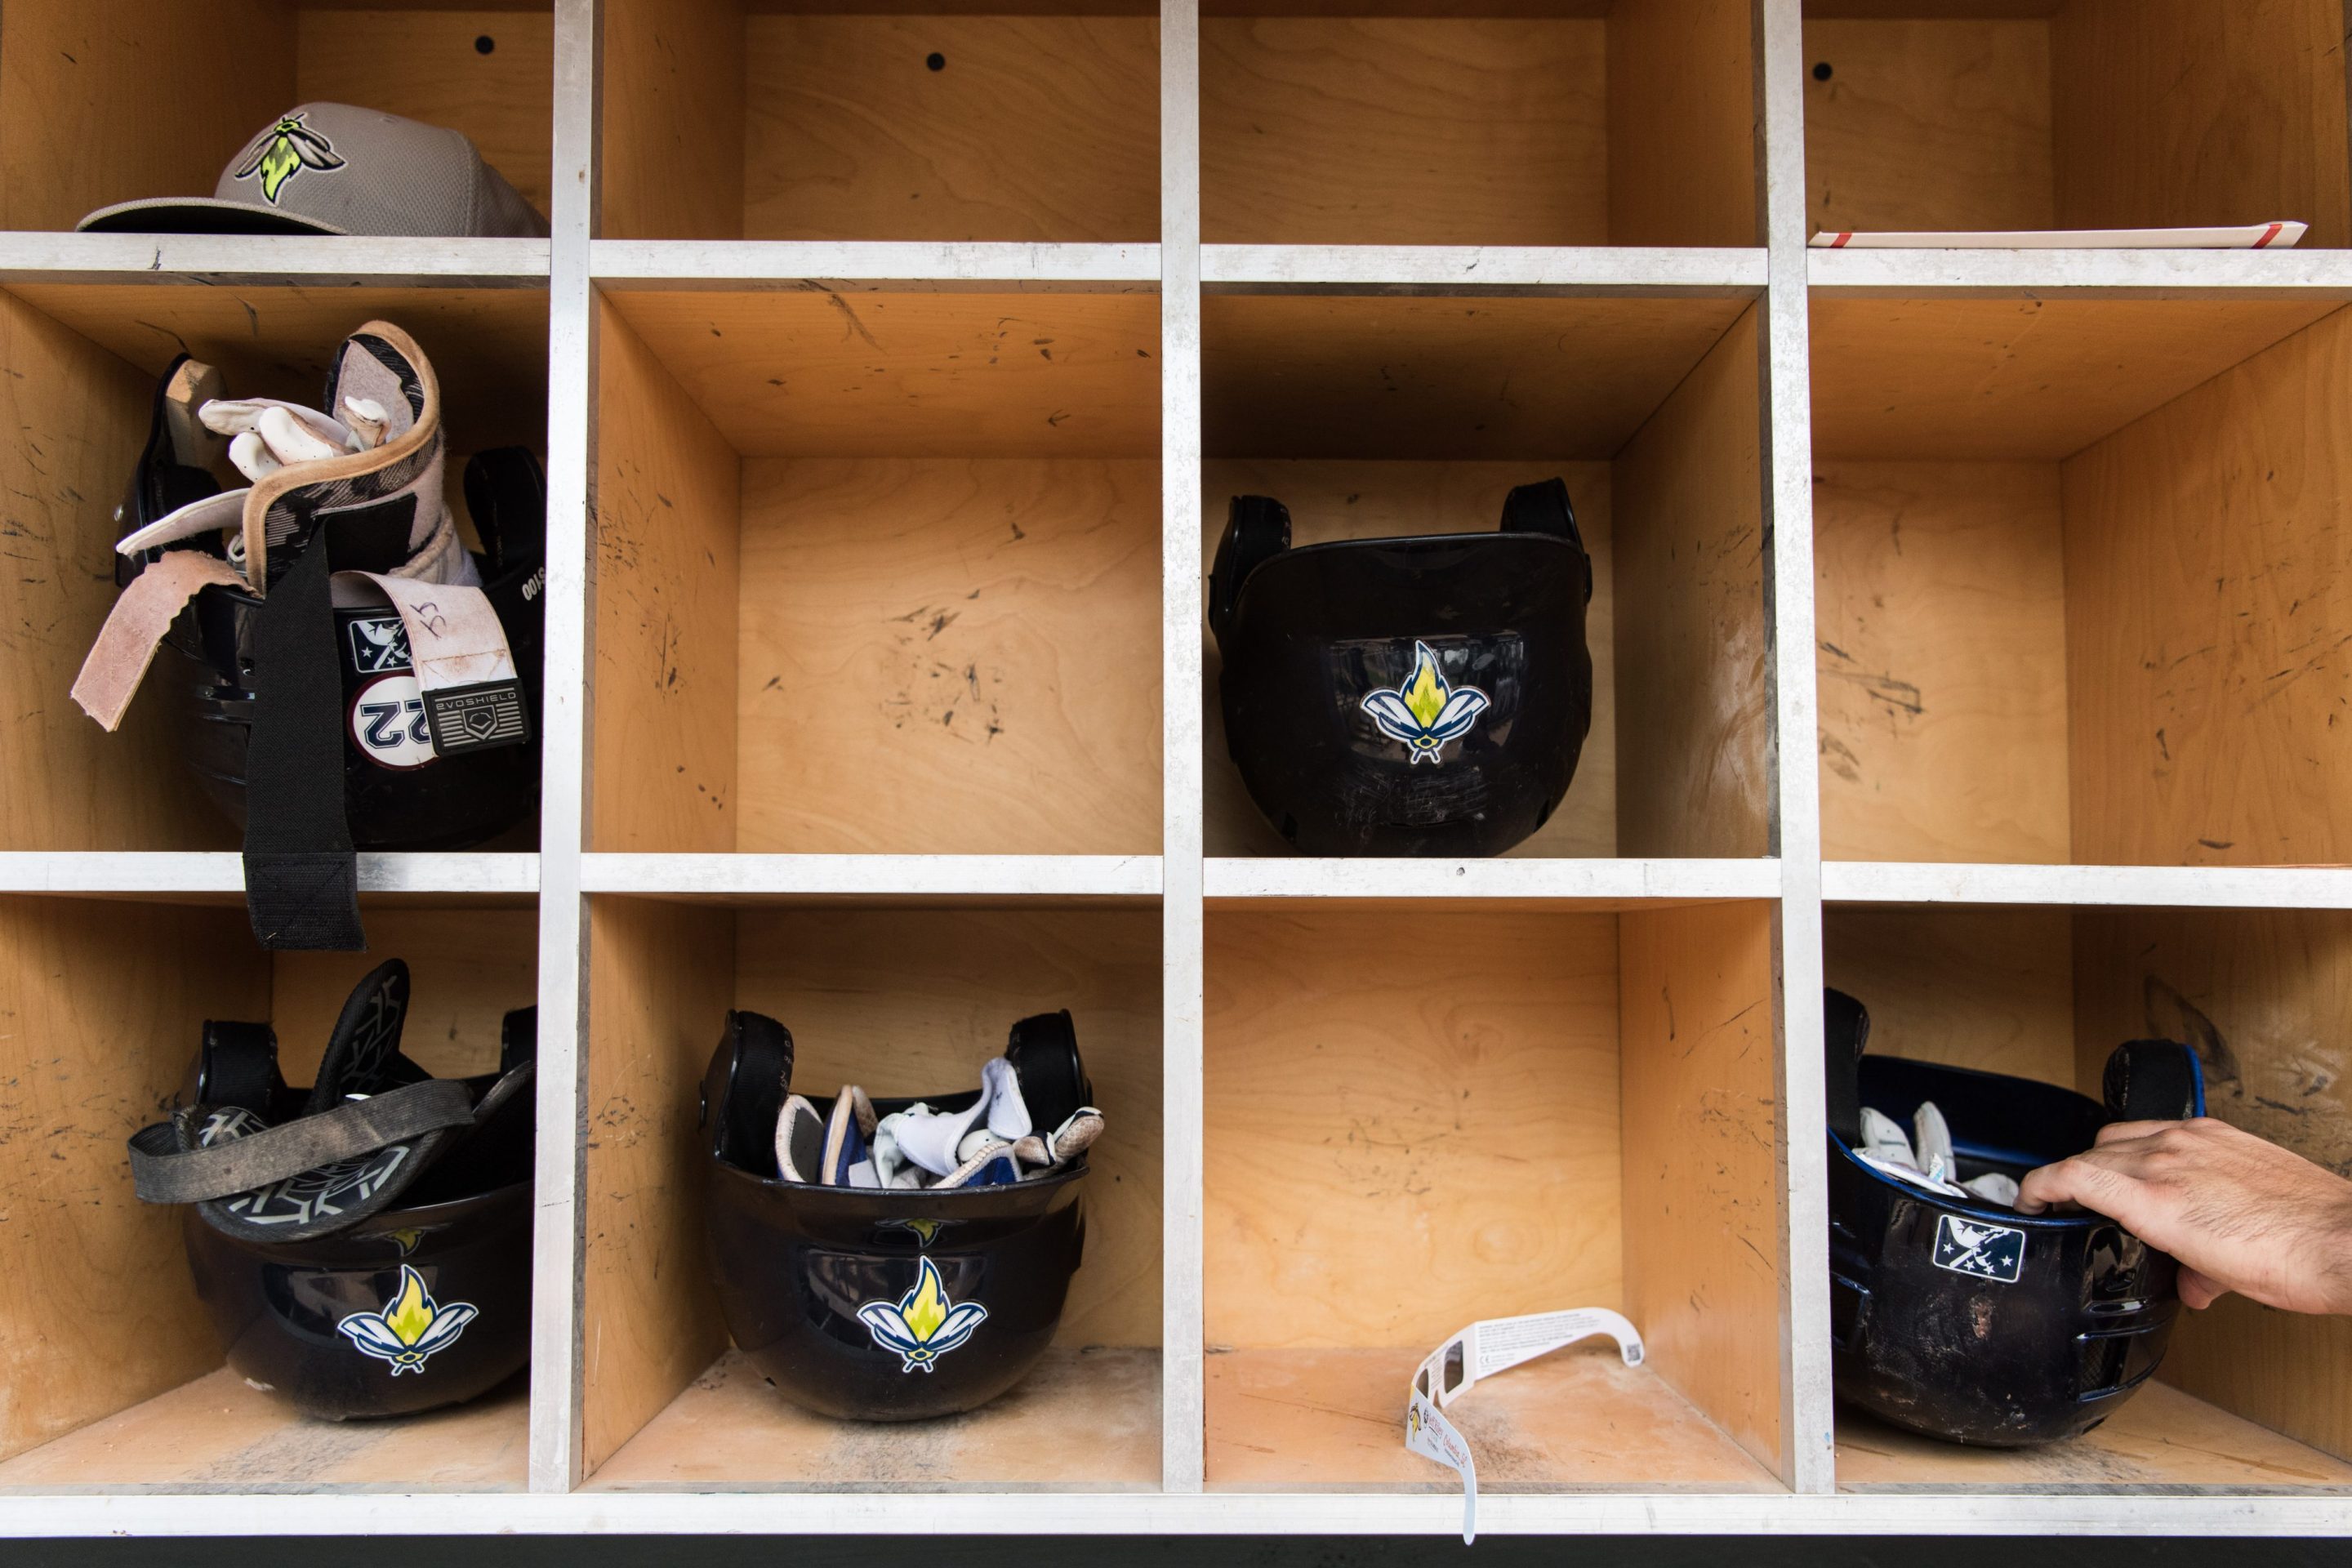 Helmets (and a pair of eclipse glasses) in the dugout of a minor league baseball team in Columbia, SC.